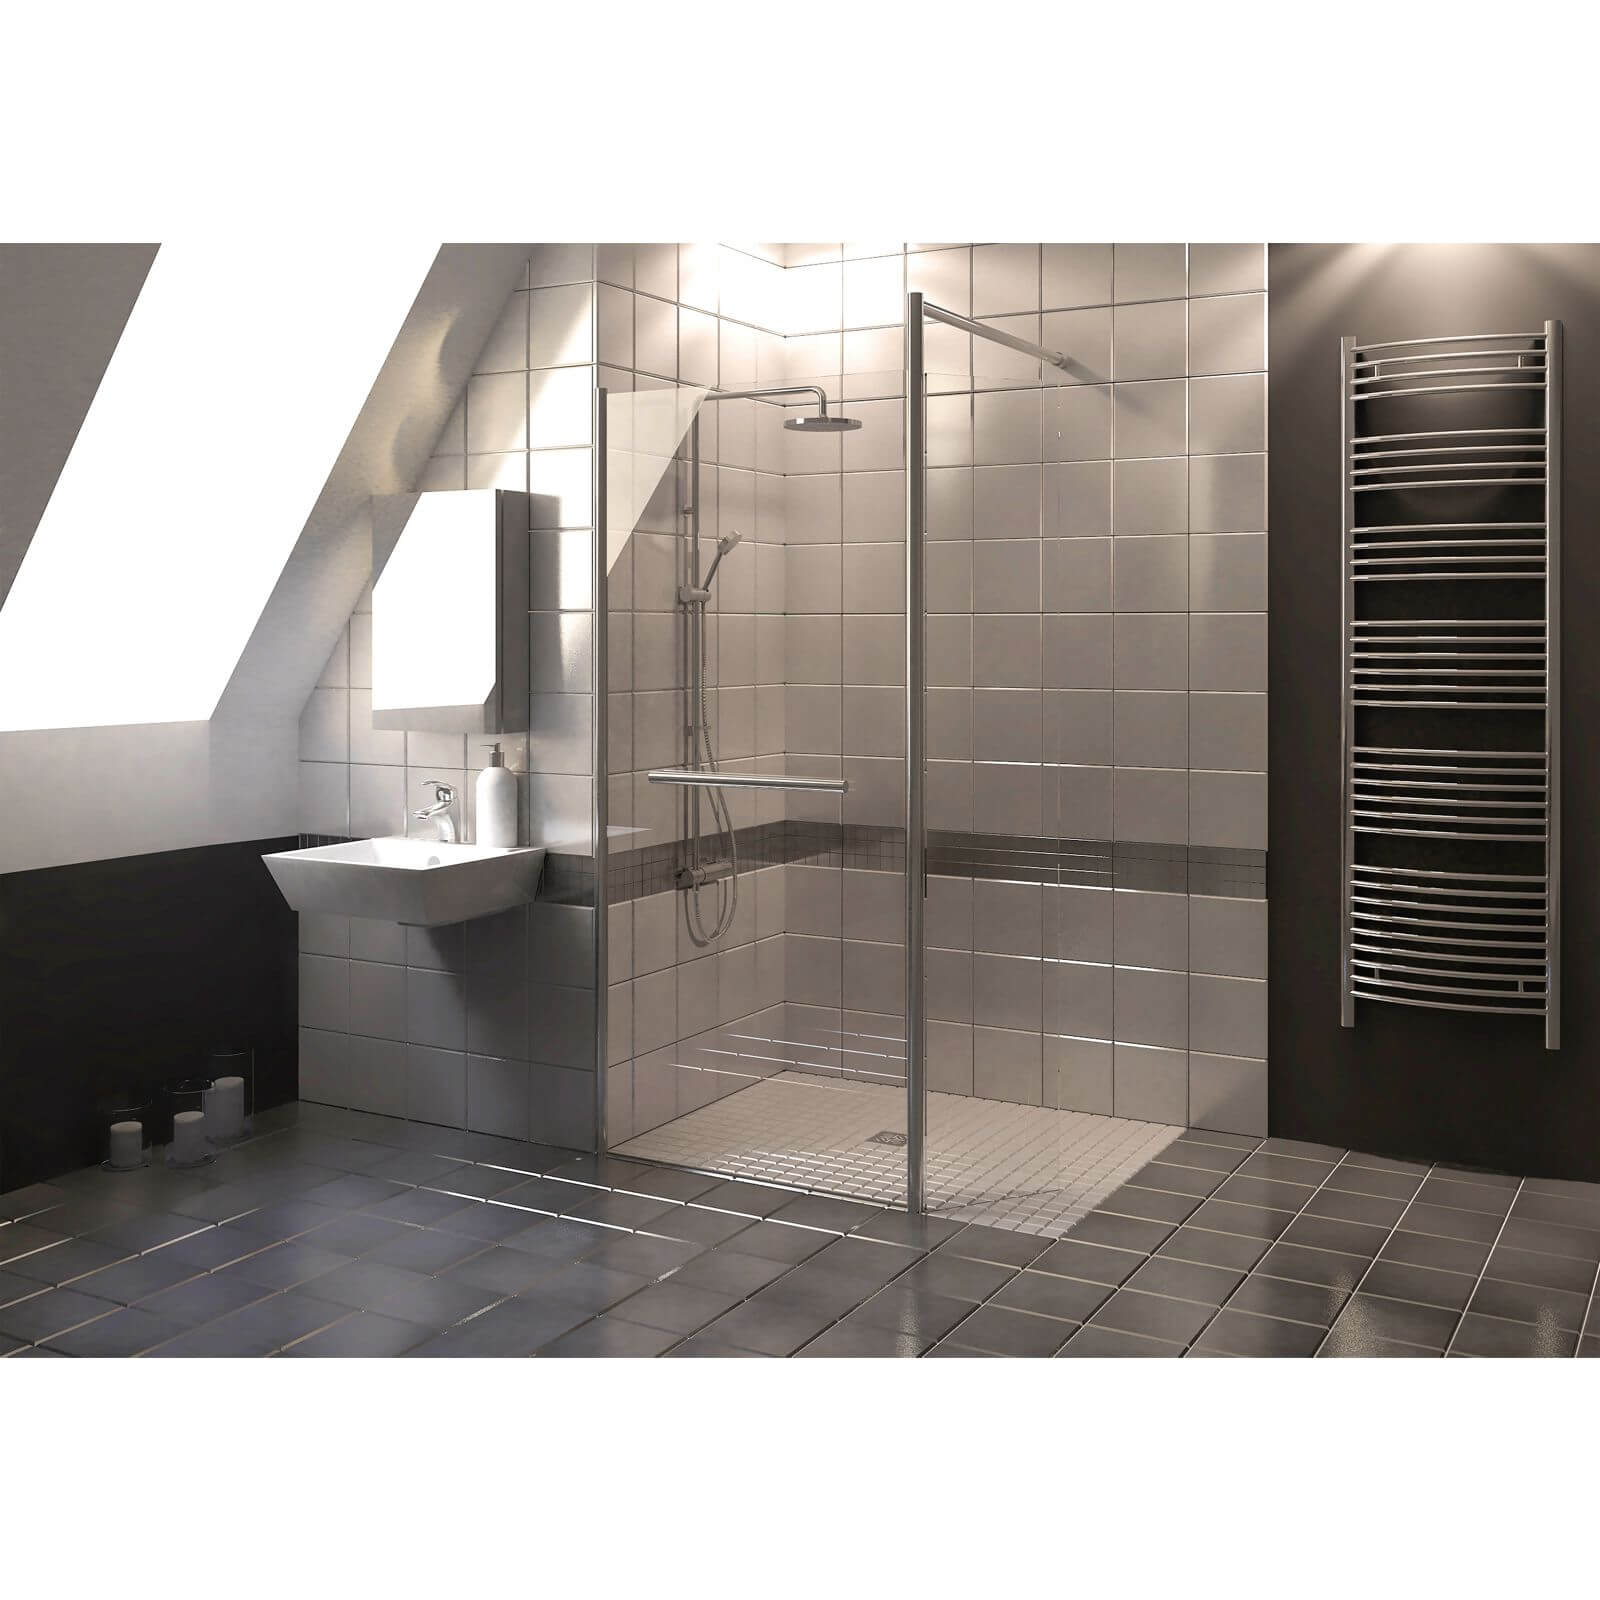 Wet Room Kit with 900mm Straight Glass Panel, 350mm Rotating Pivot Panel & 1800mm Tray